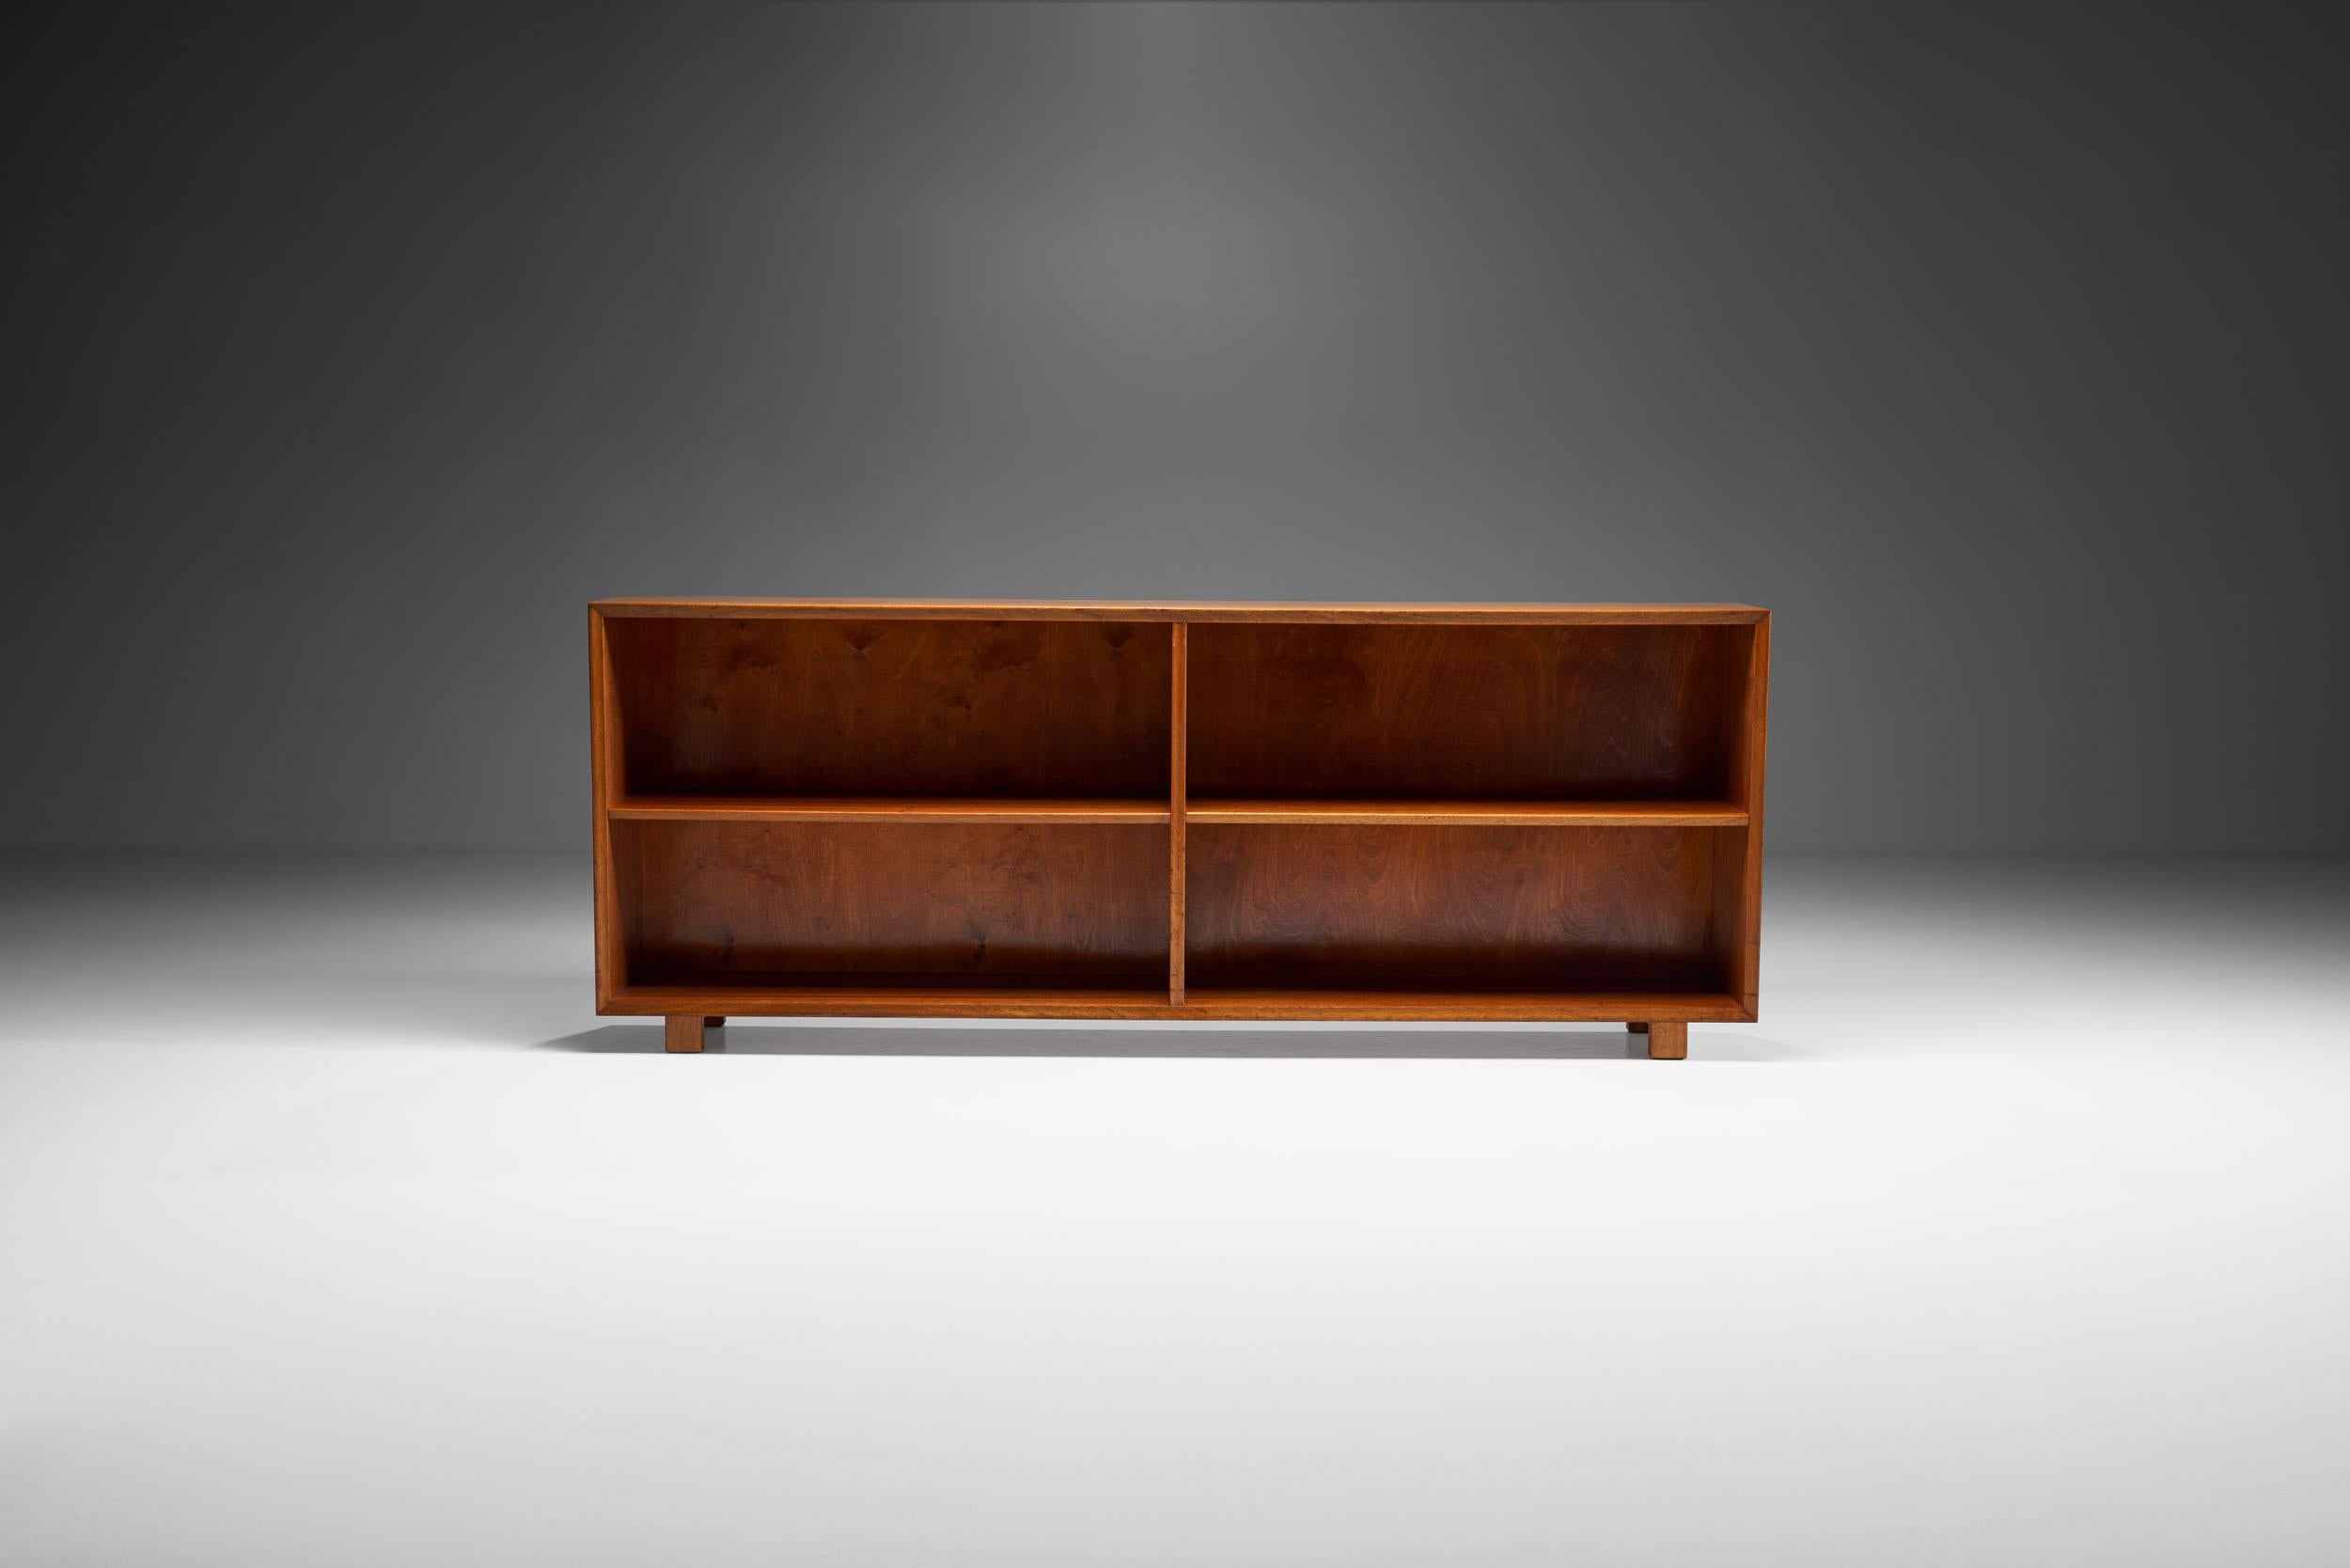 This sideboard is a beautiful example of the change in taste and design choices at the start of the midcentury design era in the early 1940s.

Elegant in its simplicity, this sideboard puts the emphasis on showcasing the material and Swedish